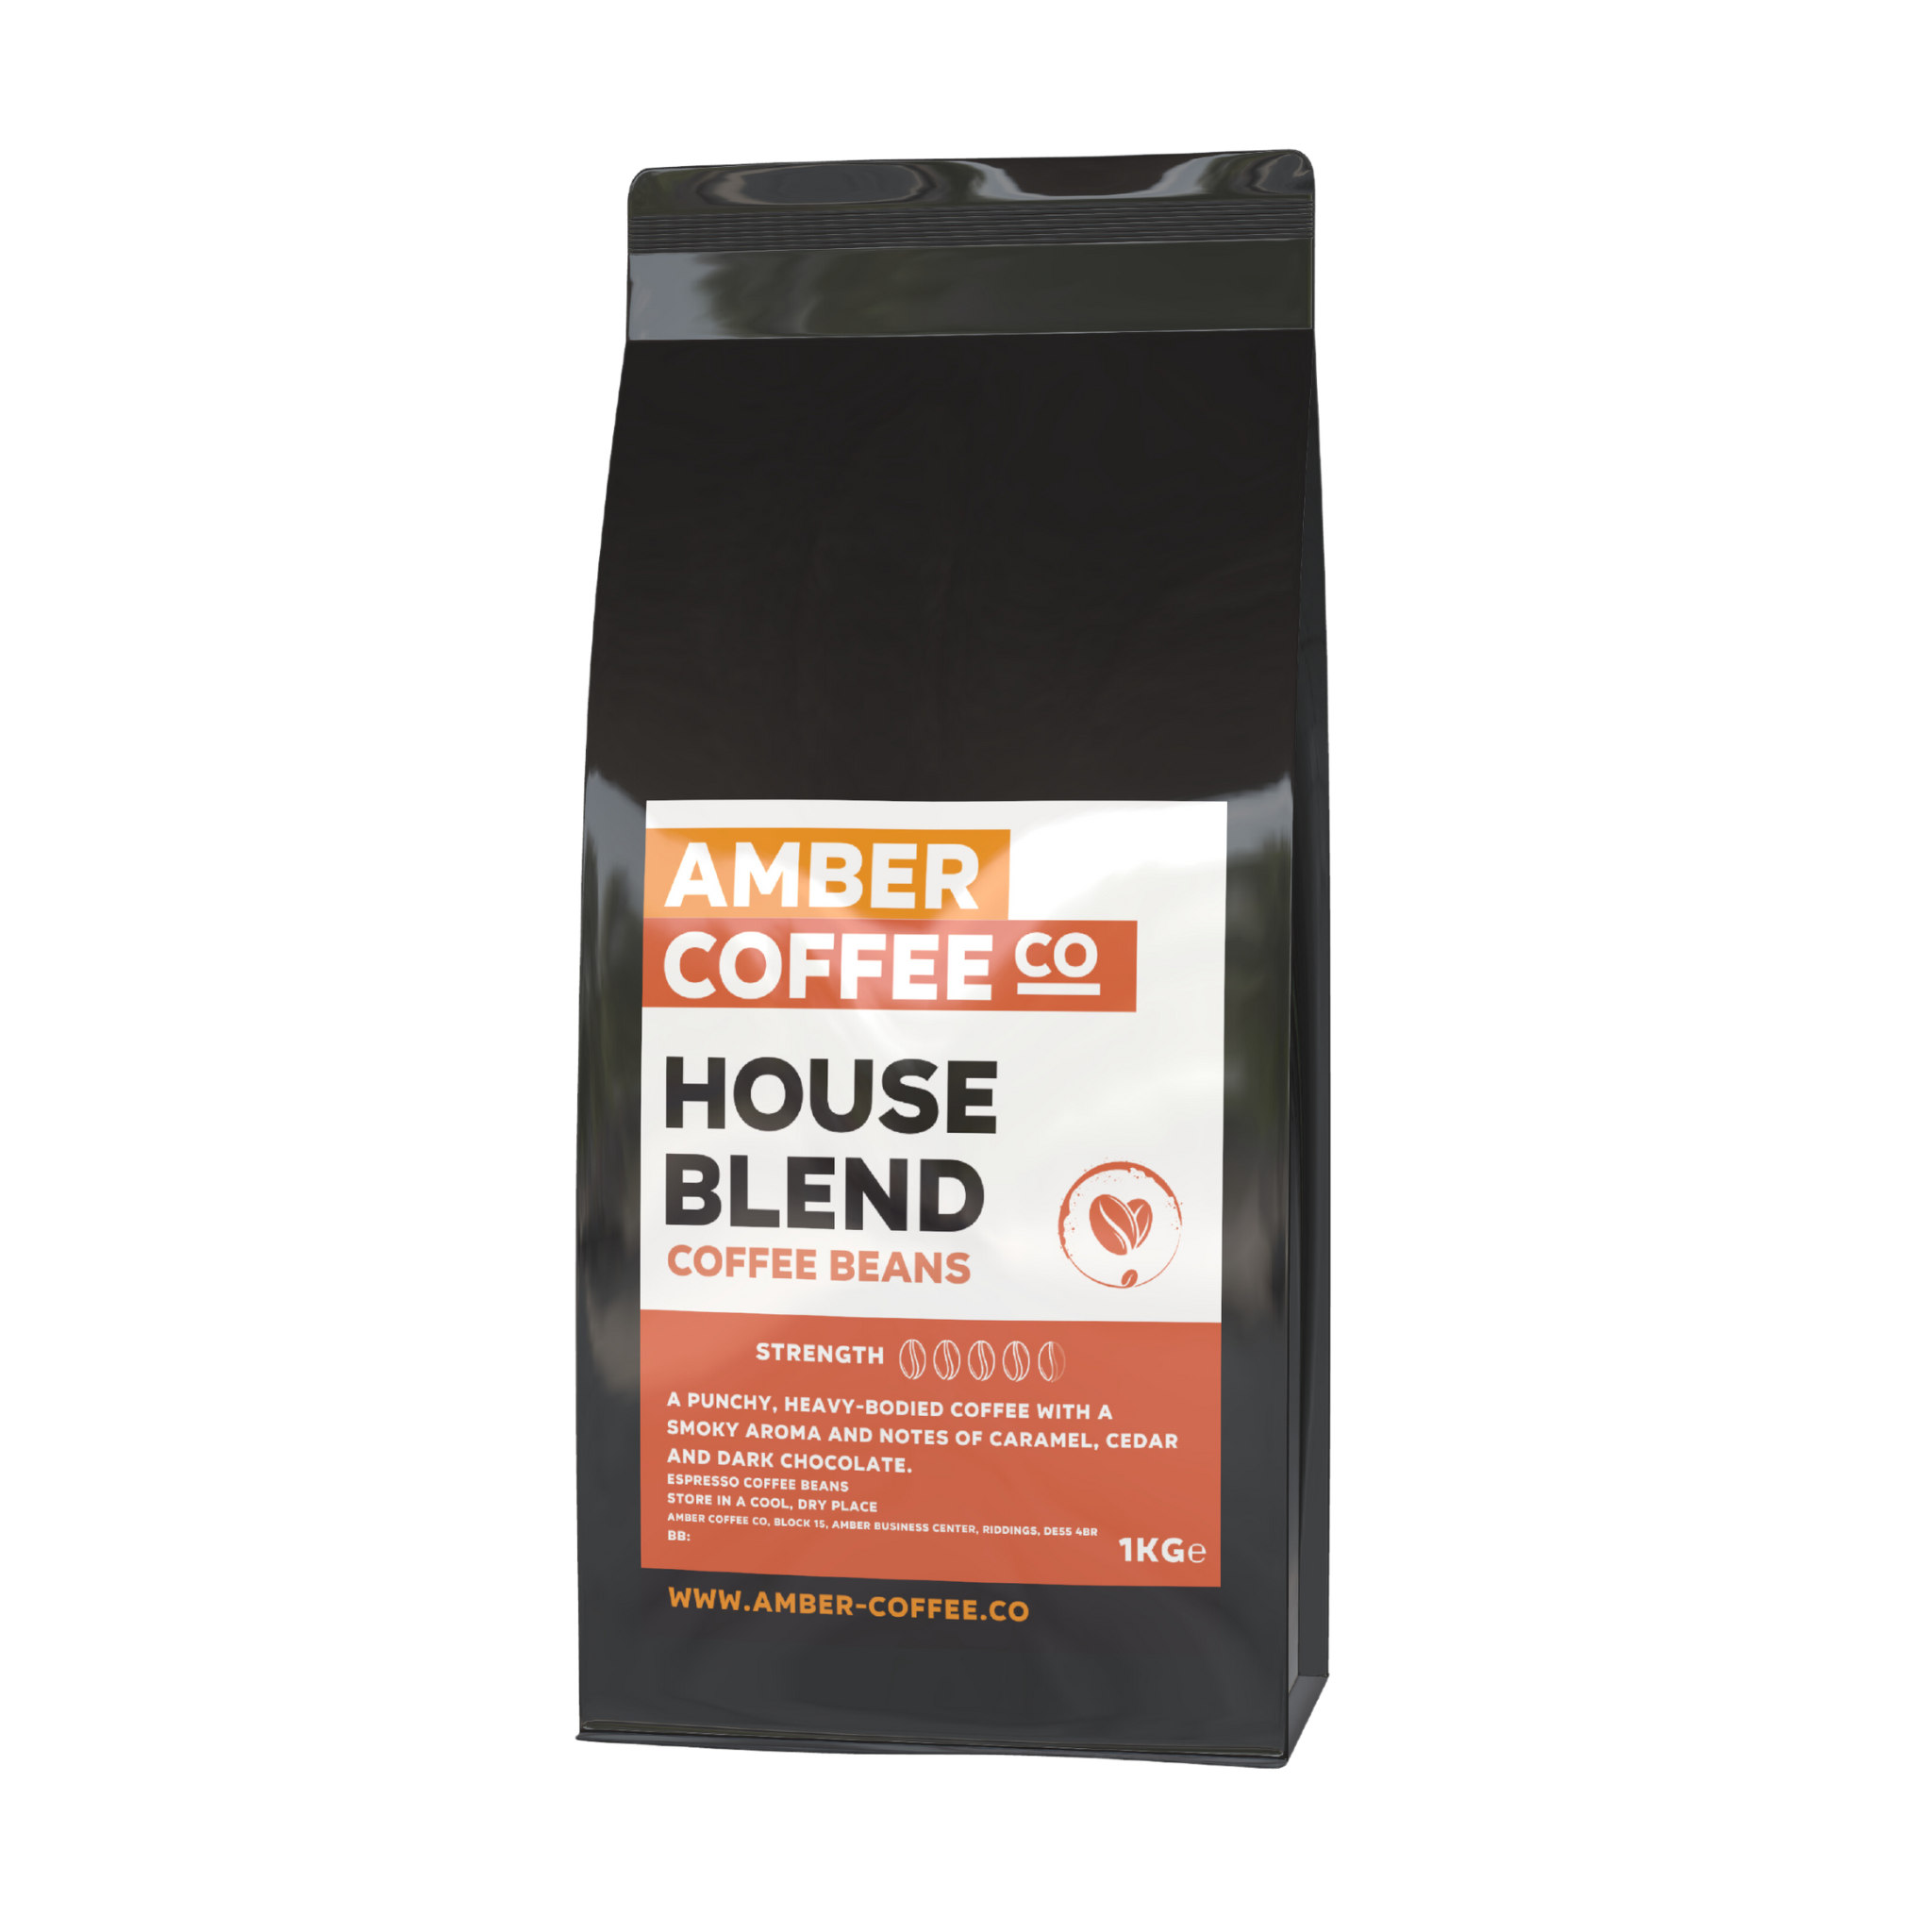 Amber Coffee Co - House Blend - Premium Coffee Beans (Full Case or 1KG Bags)